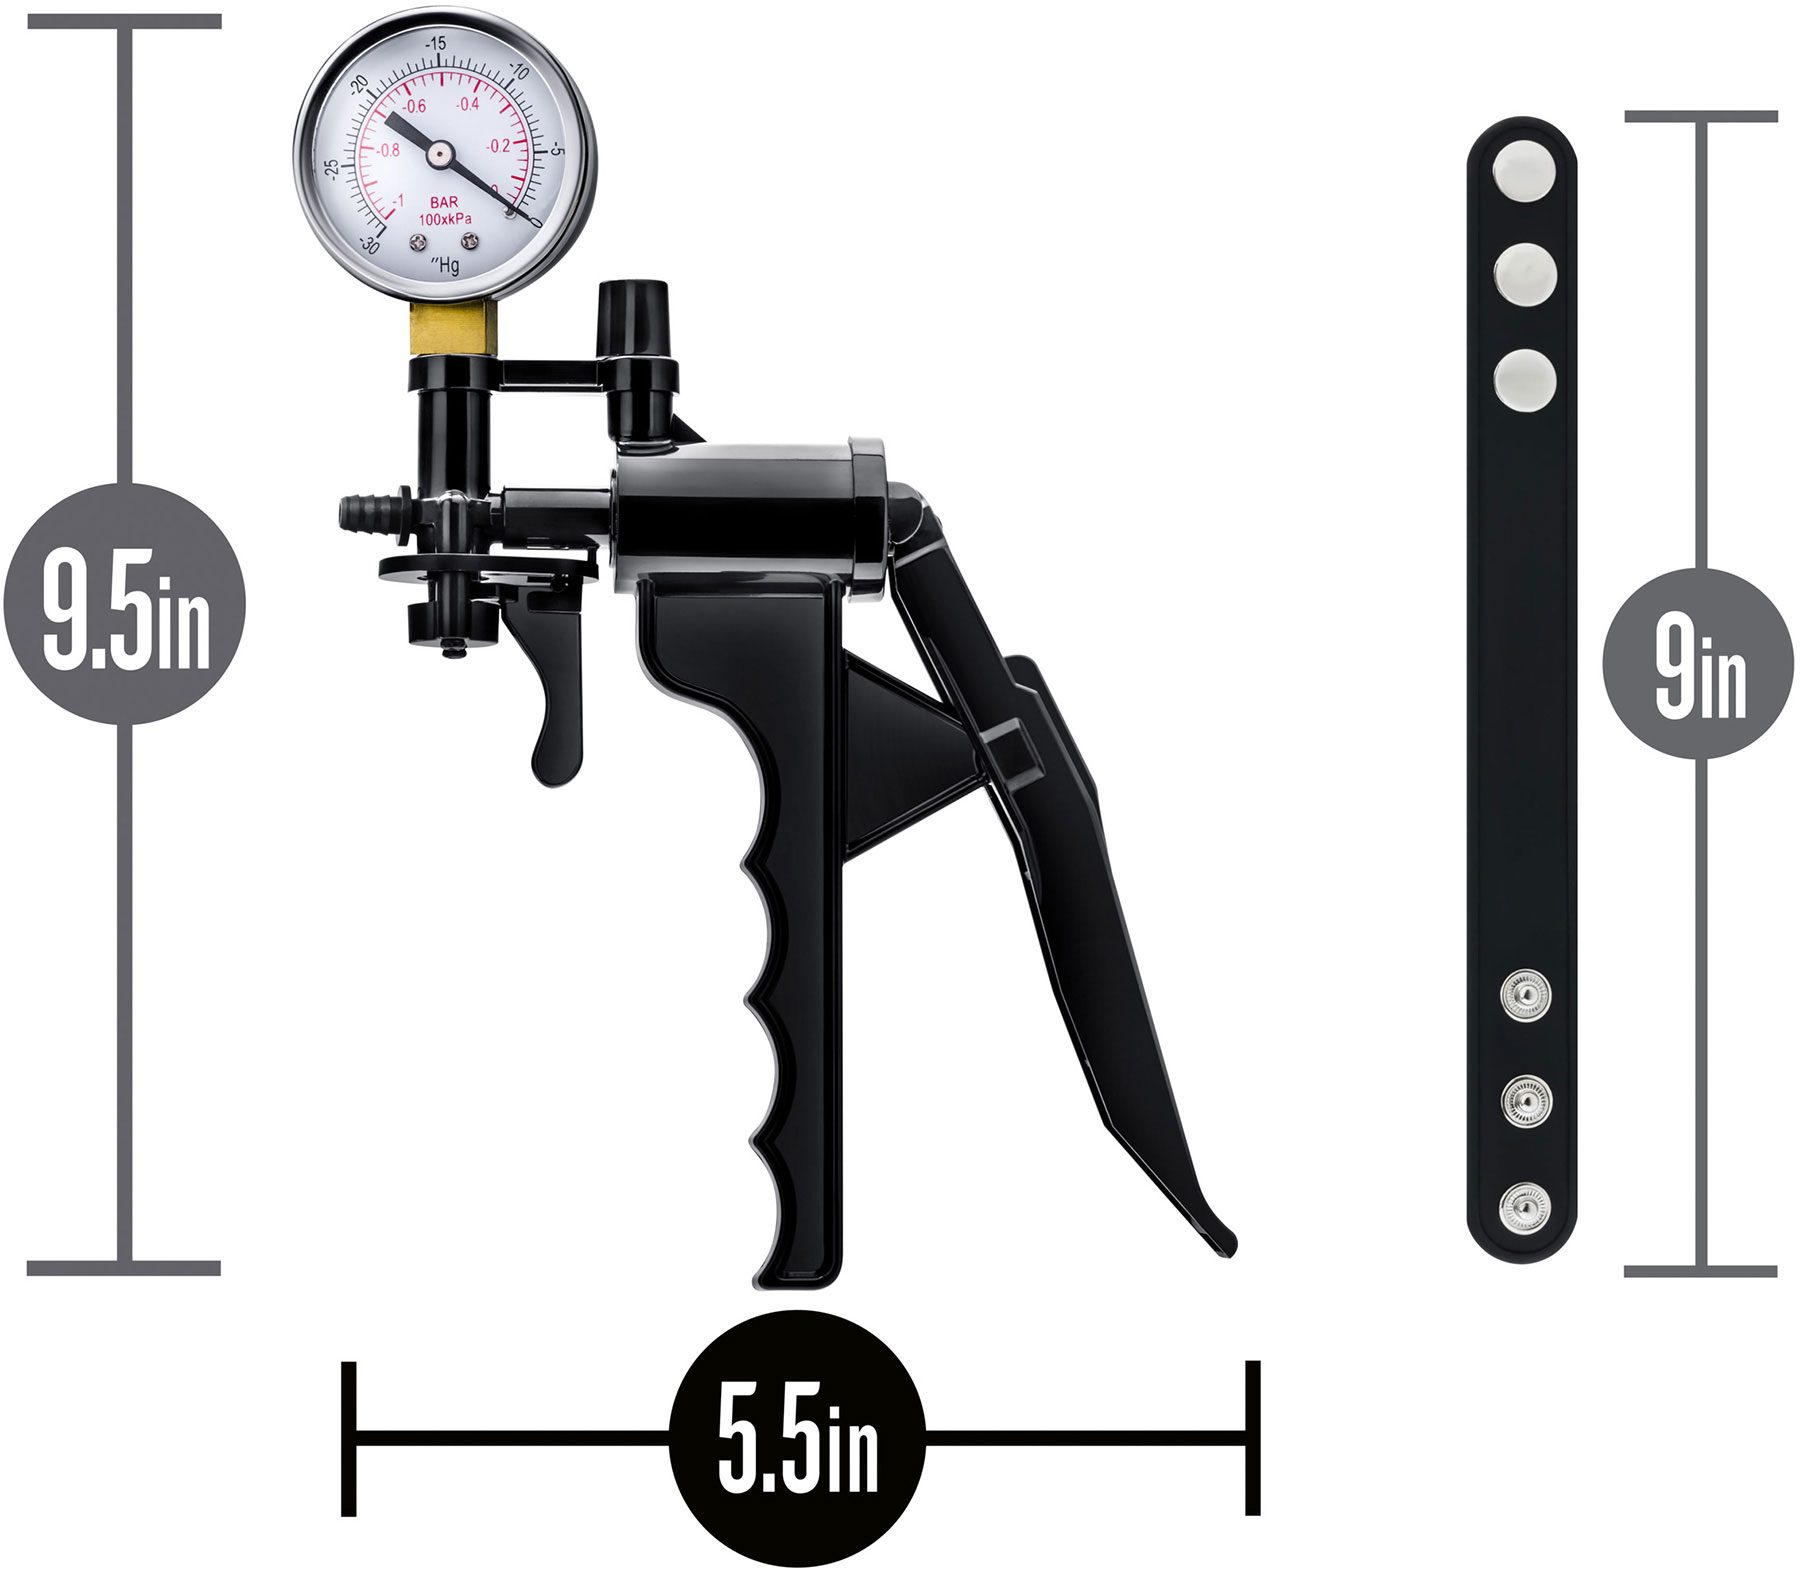 Performance Gauge Pump Pistol Upgrade With Silicone Tubing - Measurements